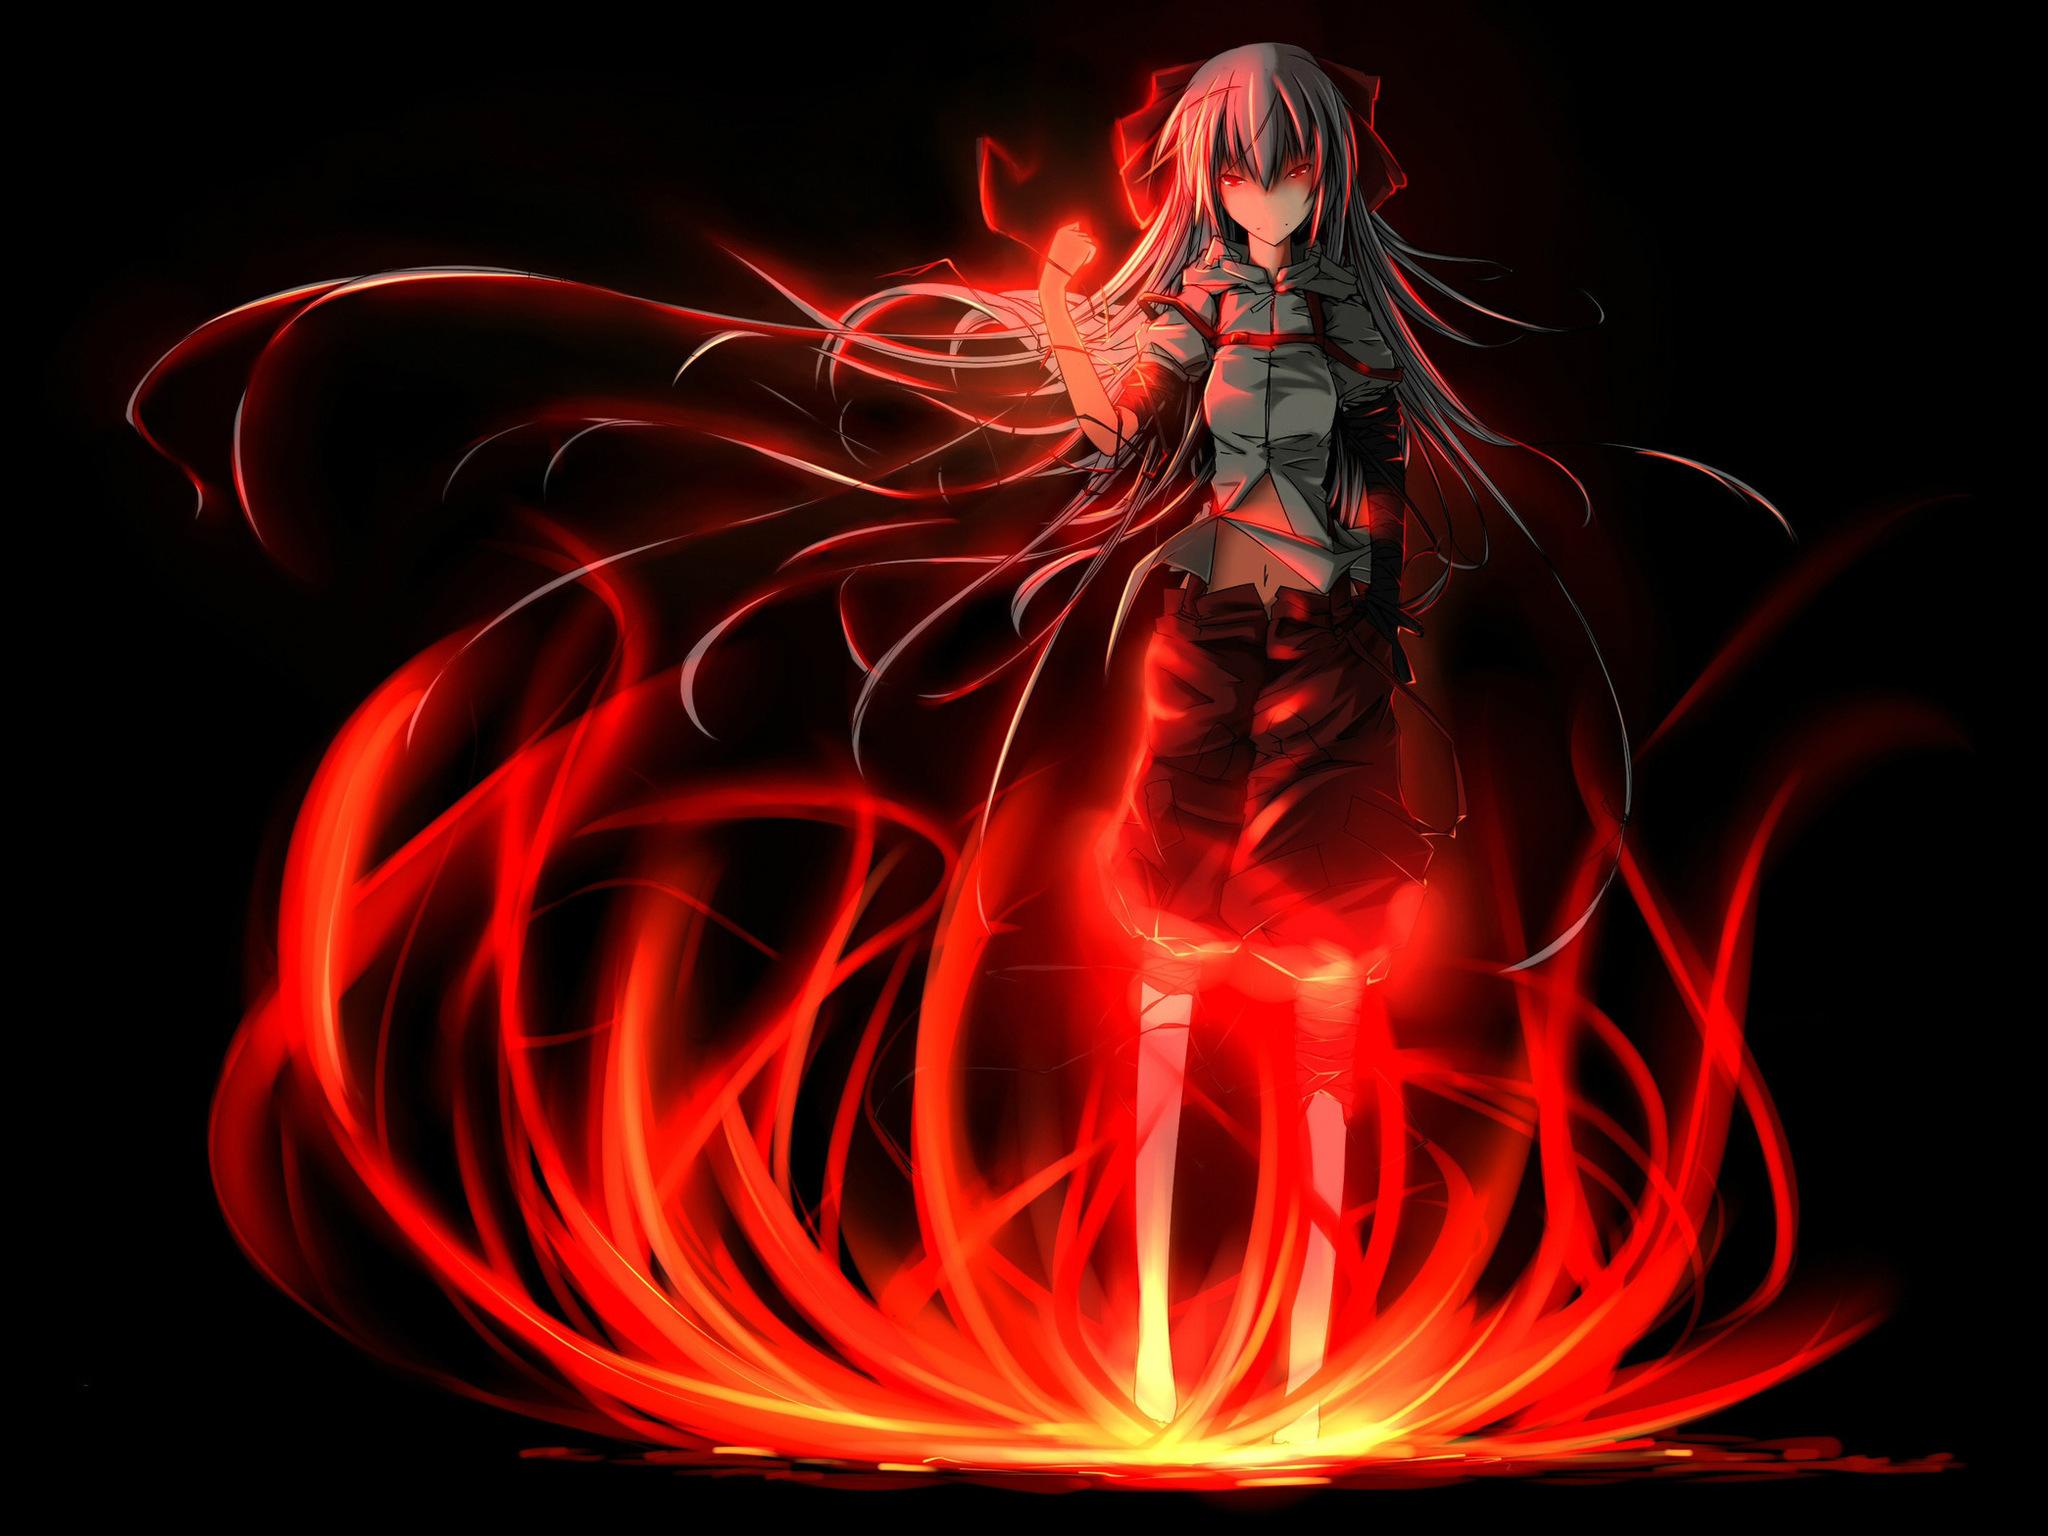 Sad Anime Wallpapers Girl On Fire 2048X1536. Wallpapers 3D For